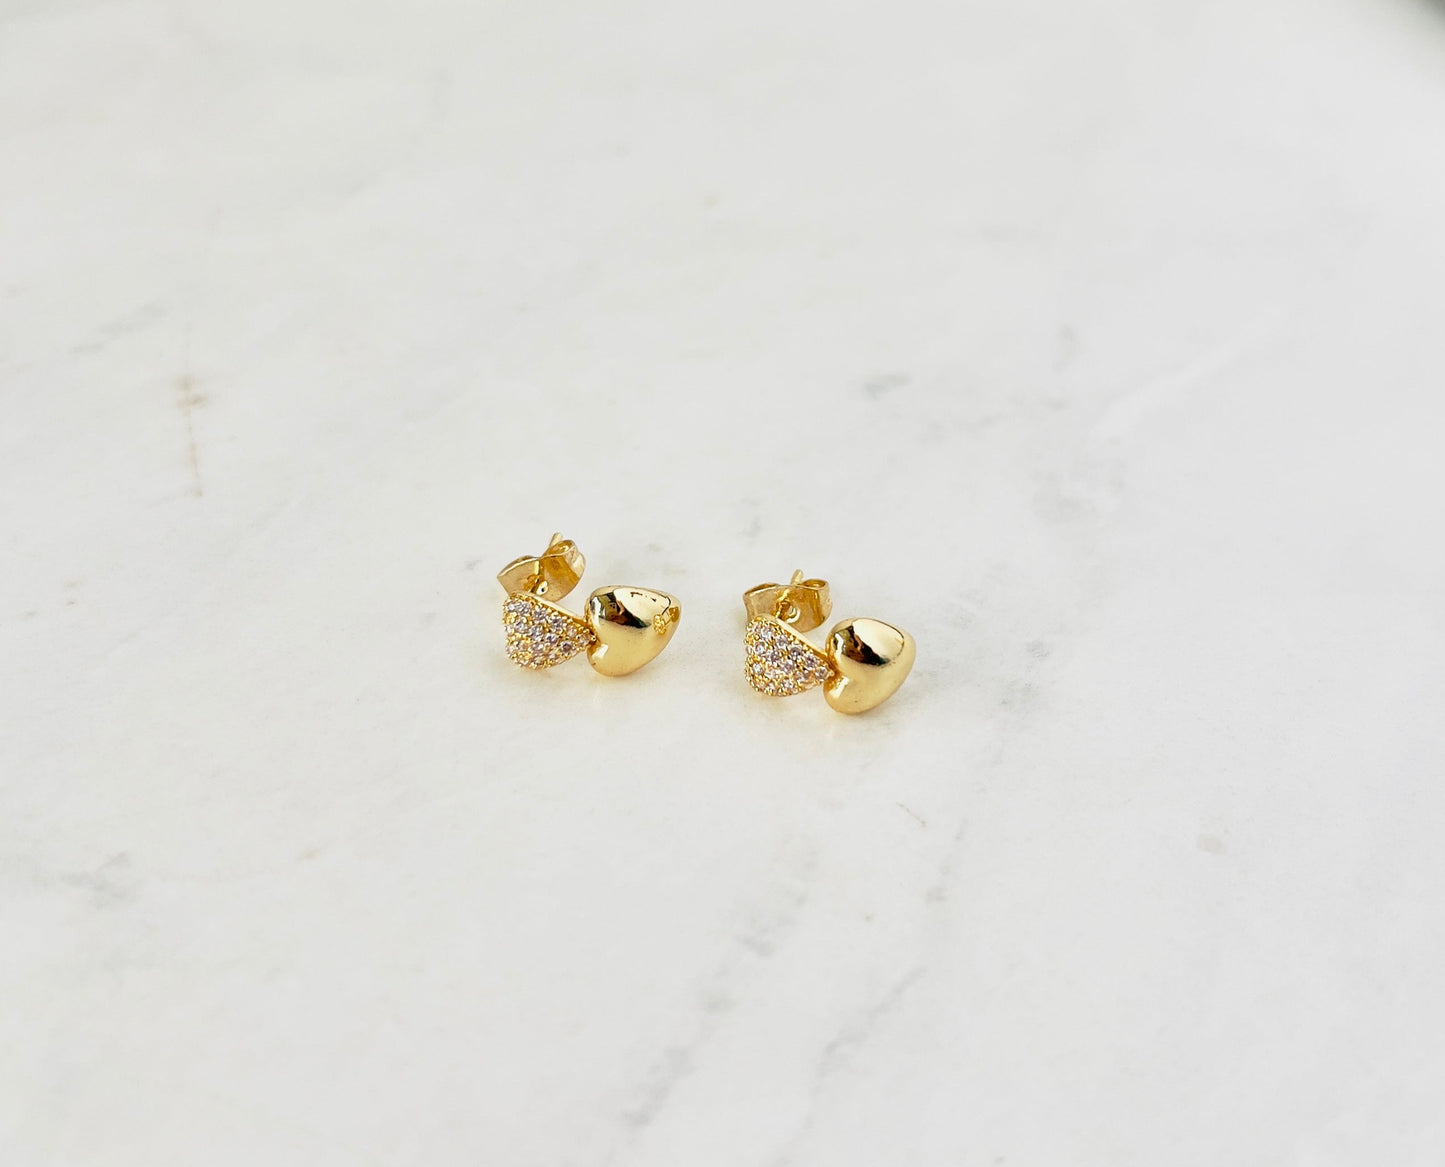 DOUBLE HEART GOLD EARRINGS IN GOLD AND ZIRCONIA PERFECT FOR SPECIAL EVENTS